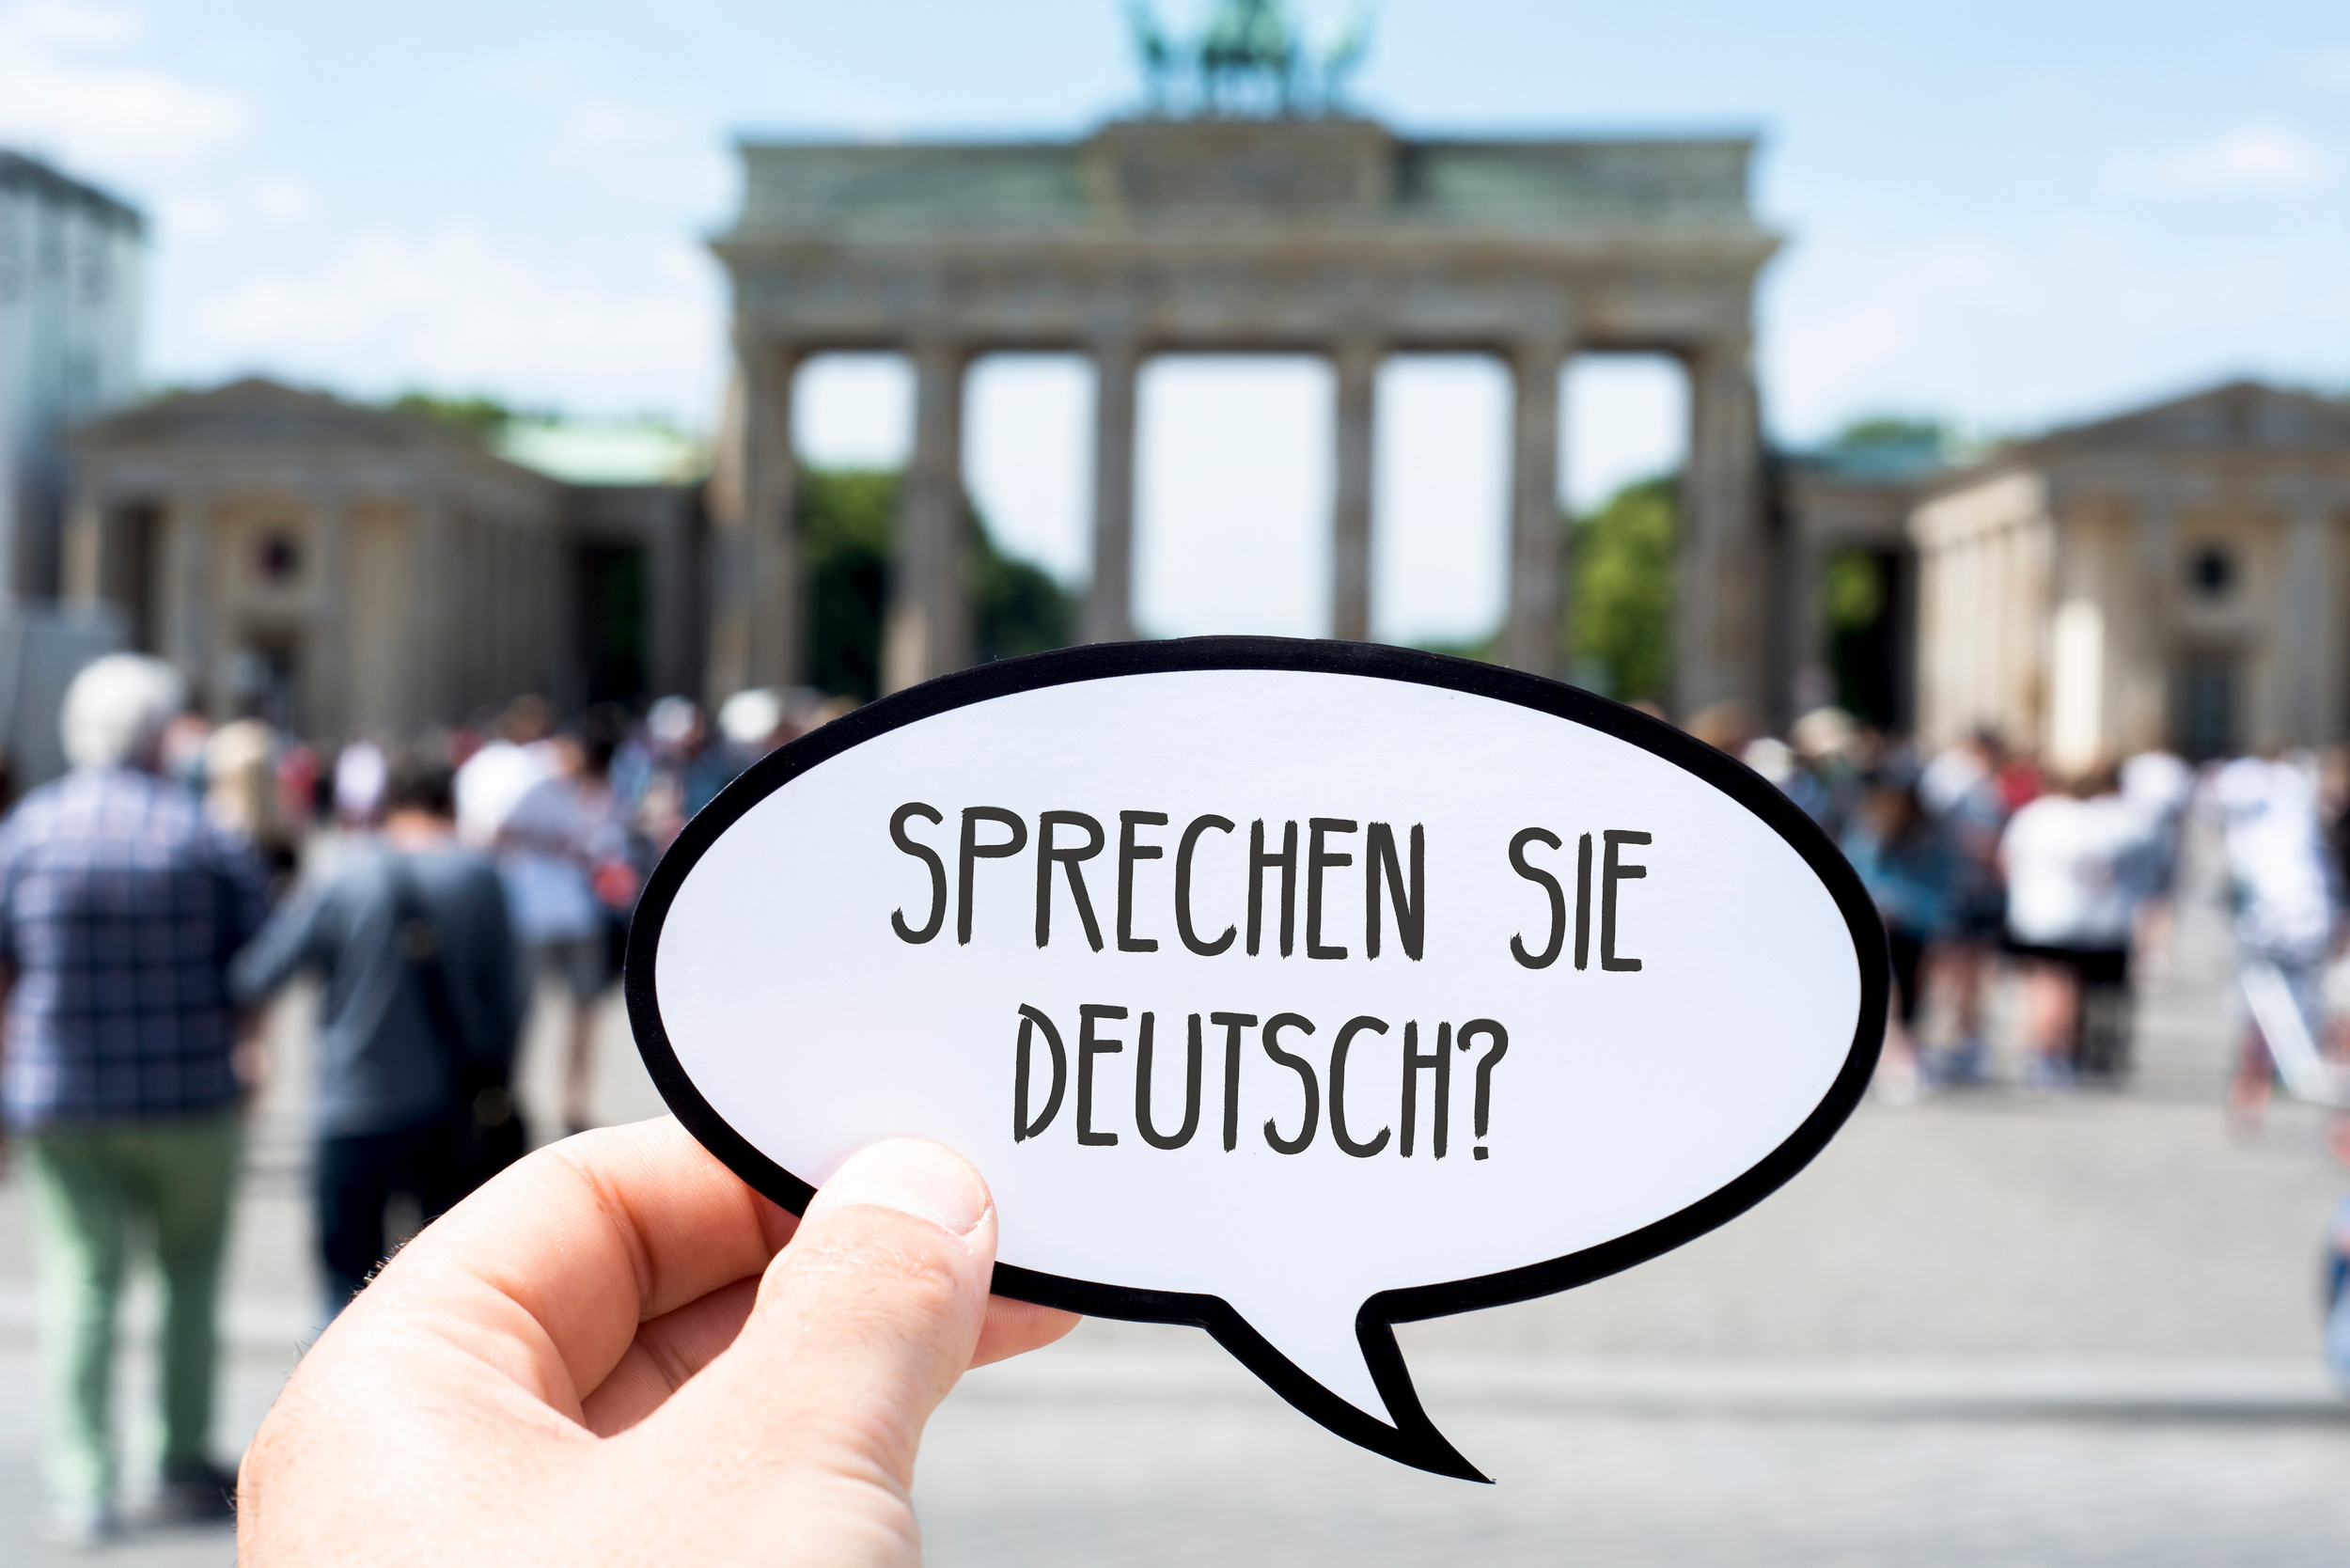 <p>German is, you guessed it, a Germanic language. Several major aspects of the language are similar, and many words have similar pronunciations and spellings, so even if you aren’t exactly correct on certain words, you should still be able to communicate. </p><p><a href='https://www.msn.com/en-us/community/channel/vid-cj9pqbr0vn9in2b6ddcd8sfgpfq6x6utp44fssrv6mc2gtybw0us'>Follow us on MSN to see more of our exclusive lifestyle content.</a></p>